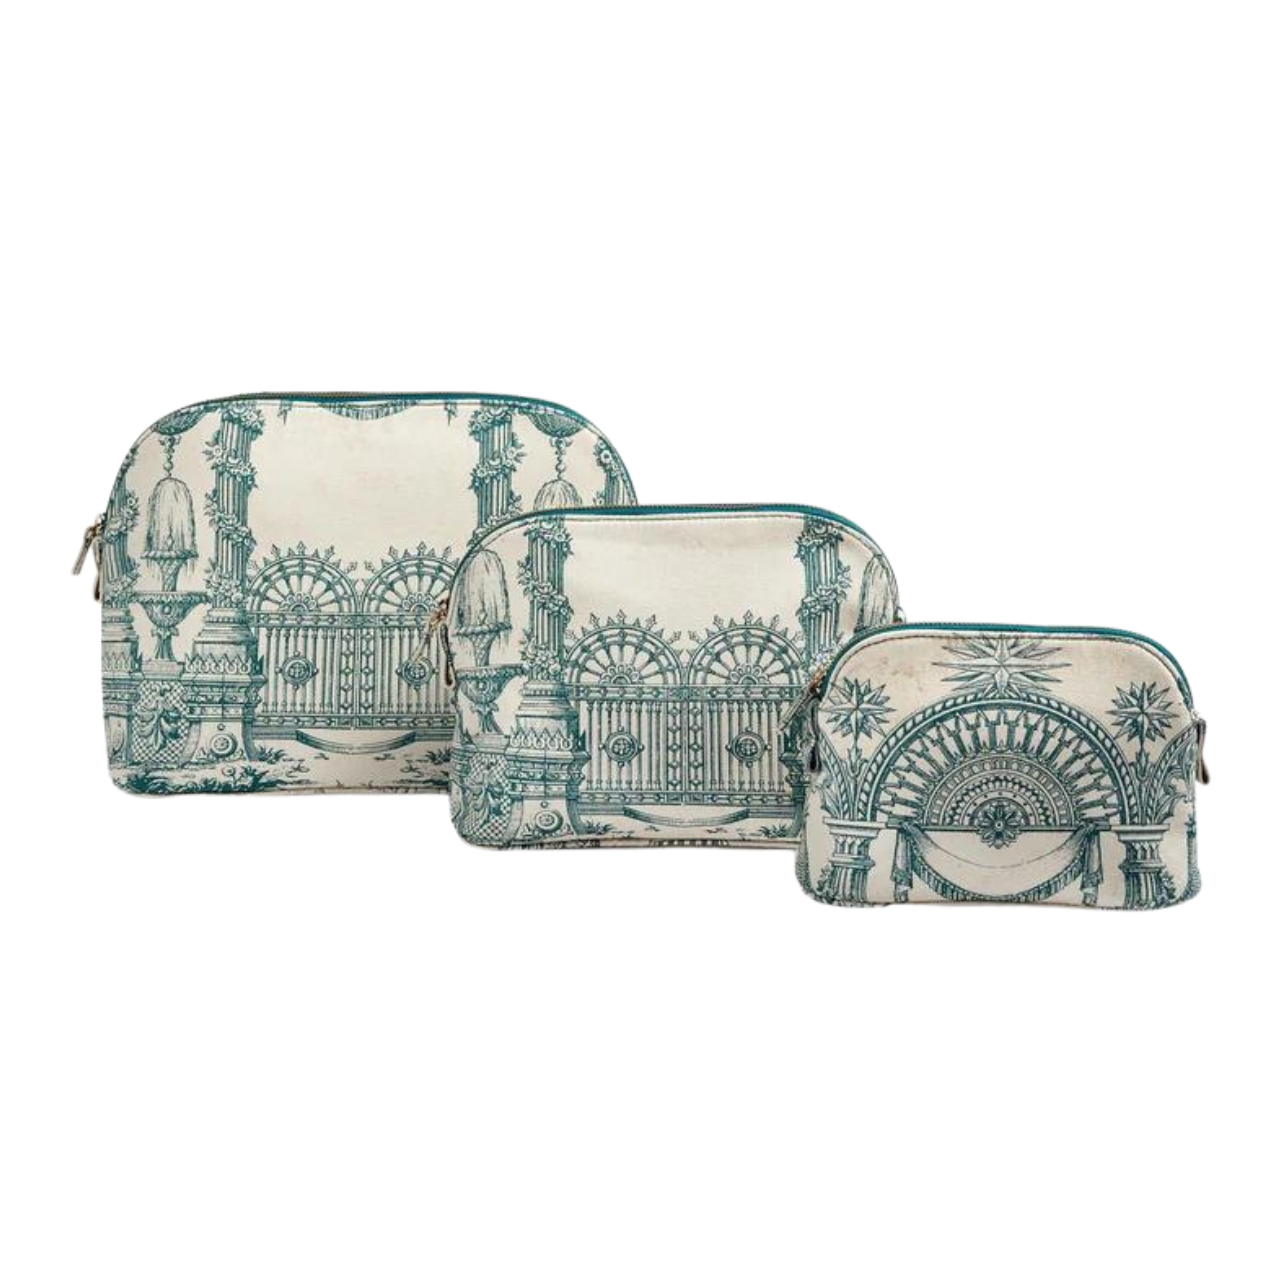 Haremlique Istanbul printed make-up bags in white and turquoise